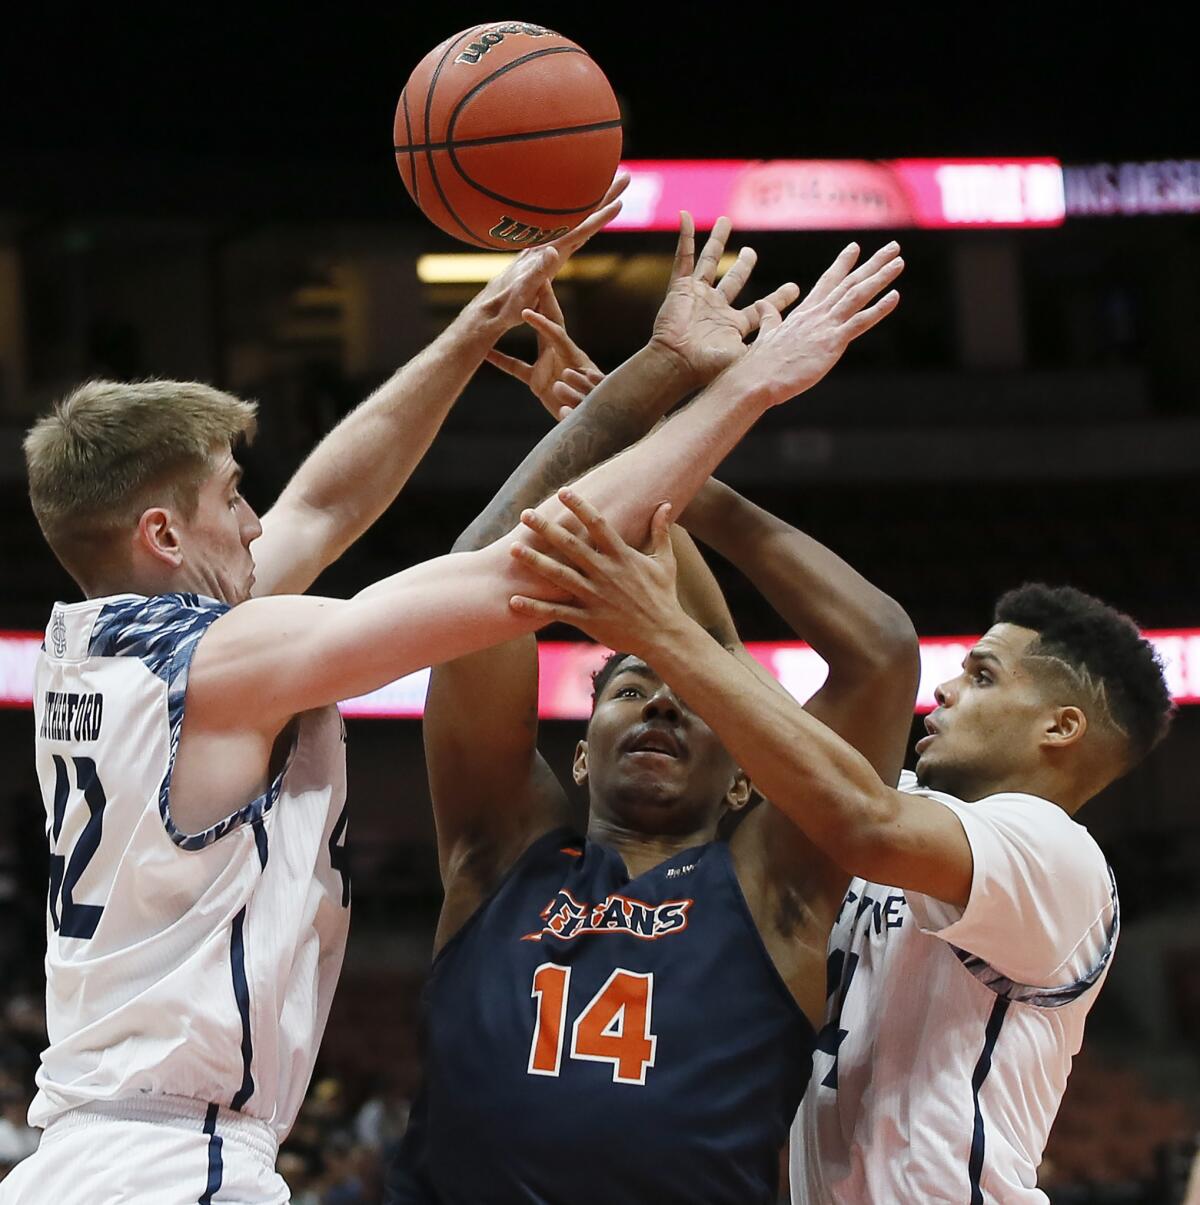 UC Irvine's Evan Leonard, right, shown battling for the ball in a March 16, 2019 game against Cal State Fullerton, was the Anteaters' top scorer in Wednesday's 63-56 loss at Long Beach State.